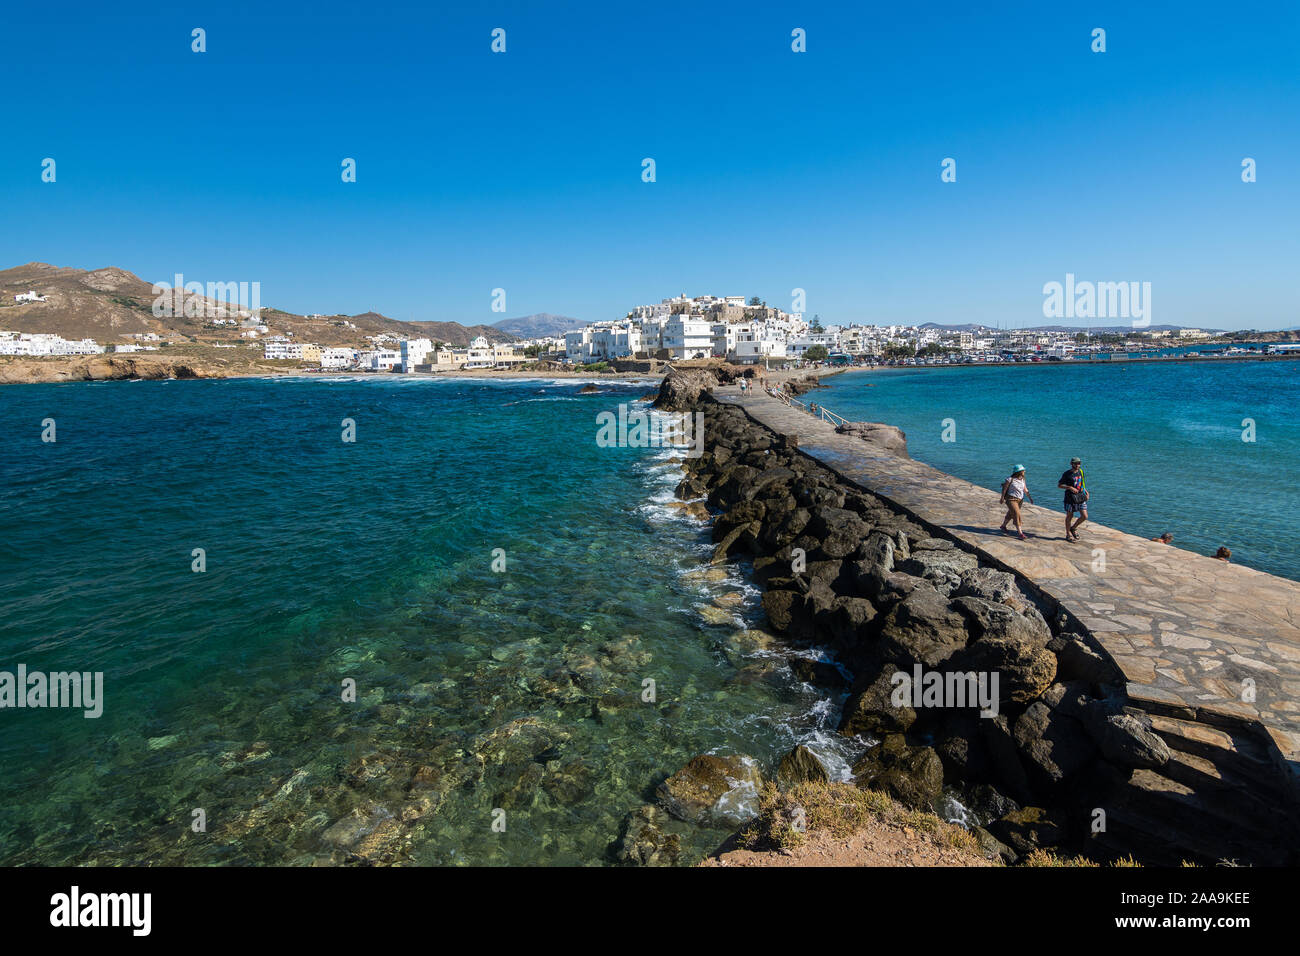 Naxos, Greece - July 12, 2019: View of Naxos capital Chora from the portara promenade area on a sunny afternoon Stock Photo